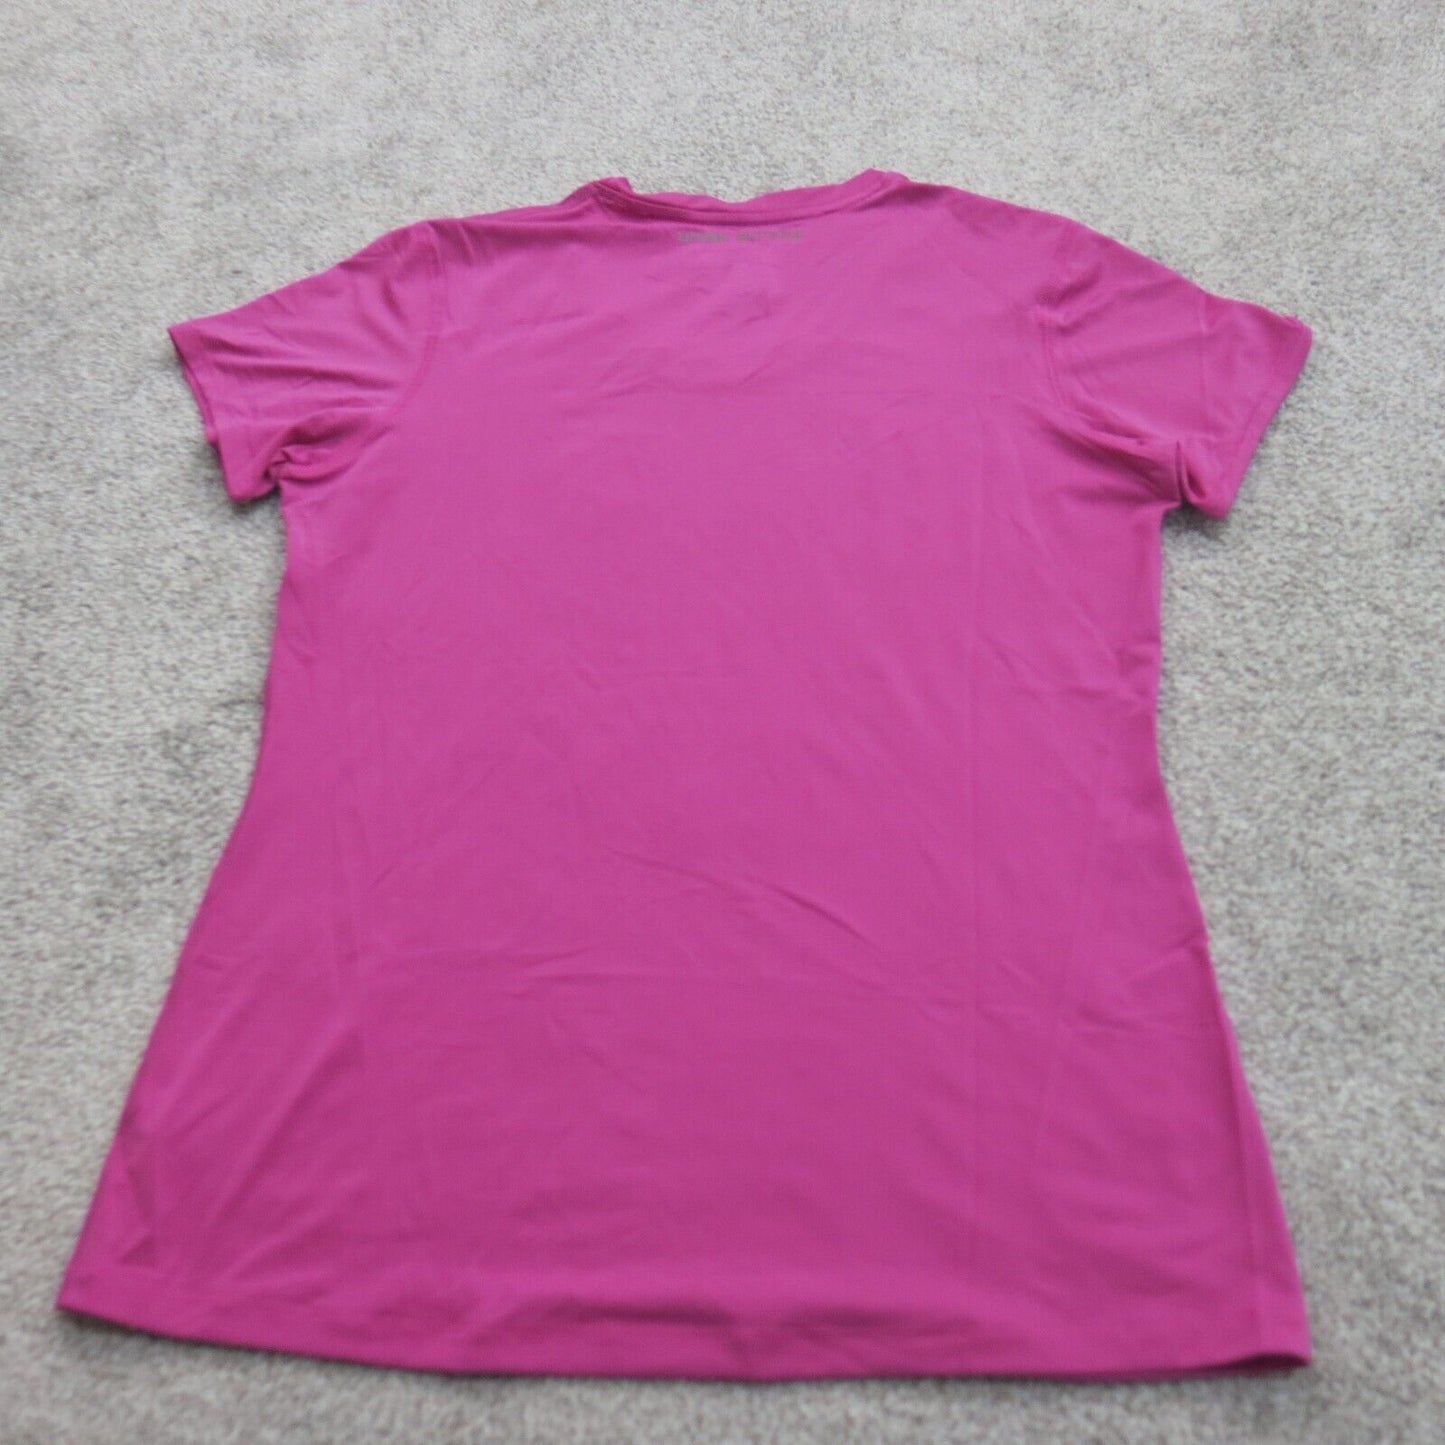 Under Armour Womens T Shirt Top Fitted Heatgear Short Sleeves Pink Size Large